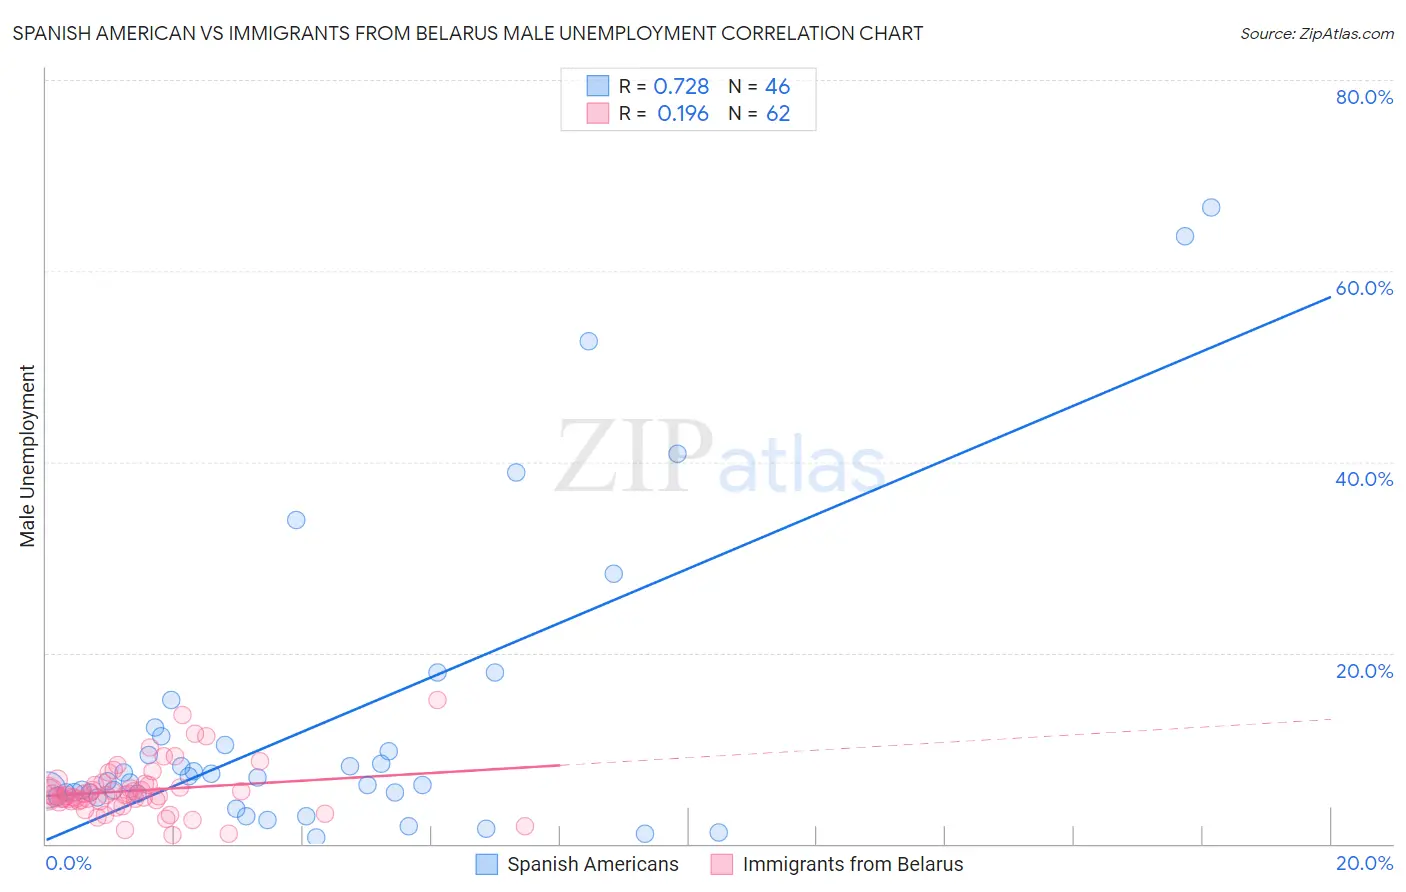 Spanish American vs Immigrants from Belarus Male Unemployment